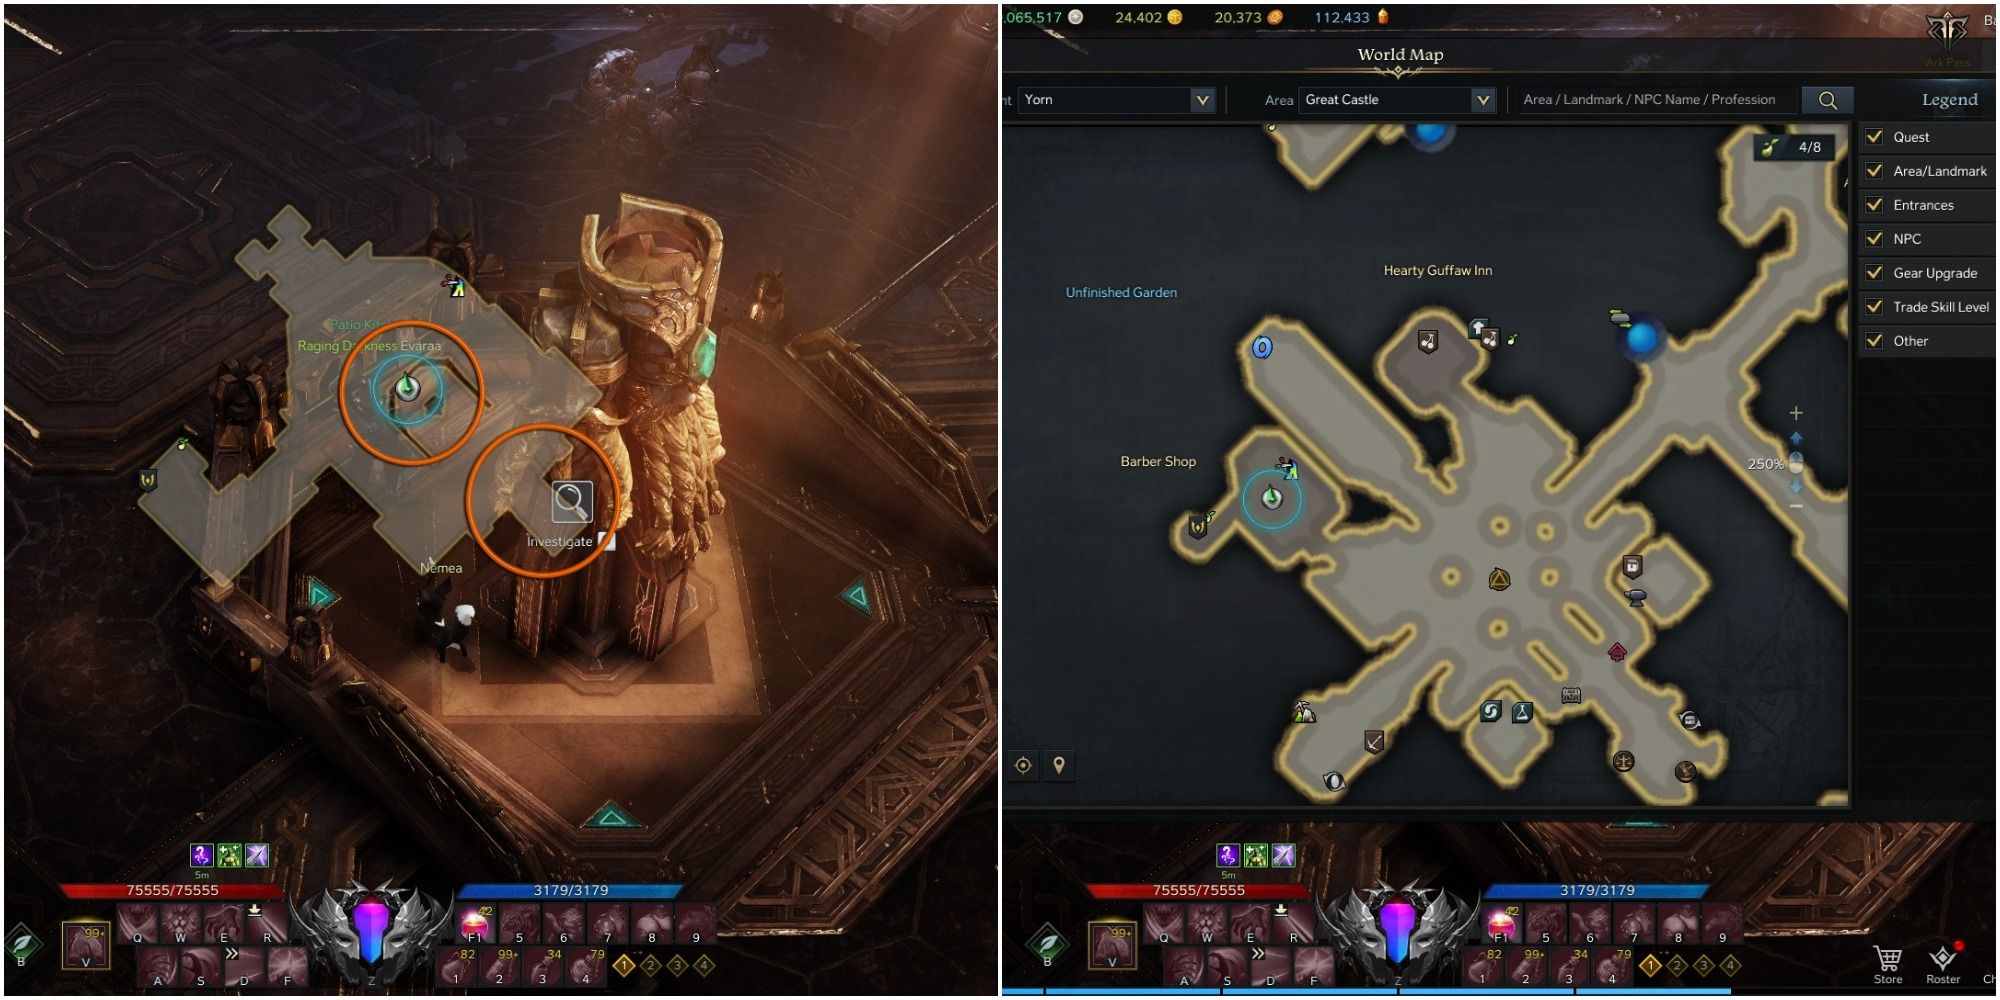 Lost Ark split image of Yorn's Hidden Story 5-3 location with mini-map open, orange circle around object and player icon